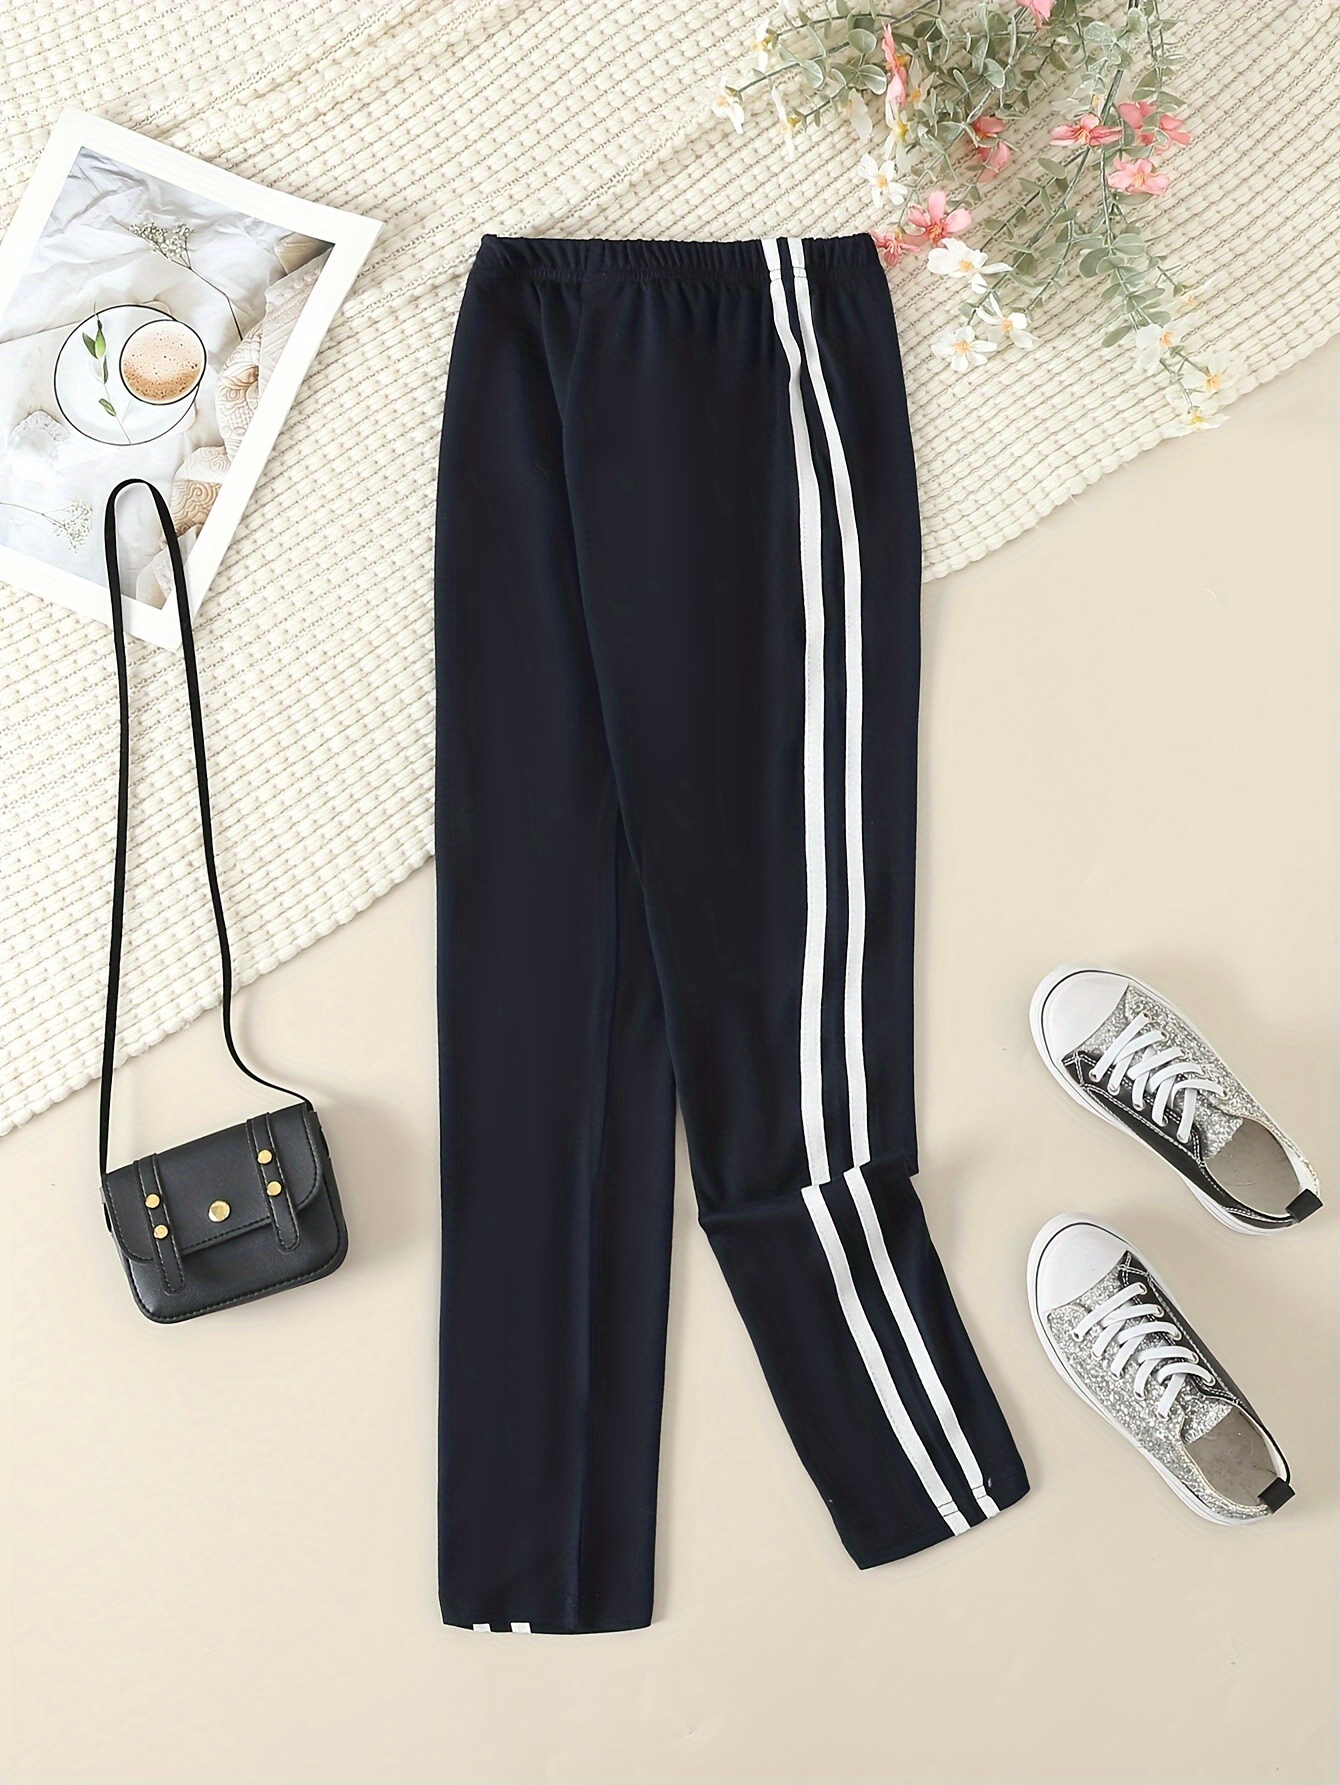 Baby High Waisted Stretch Jogger Pants